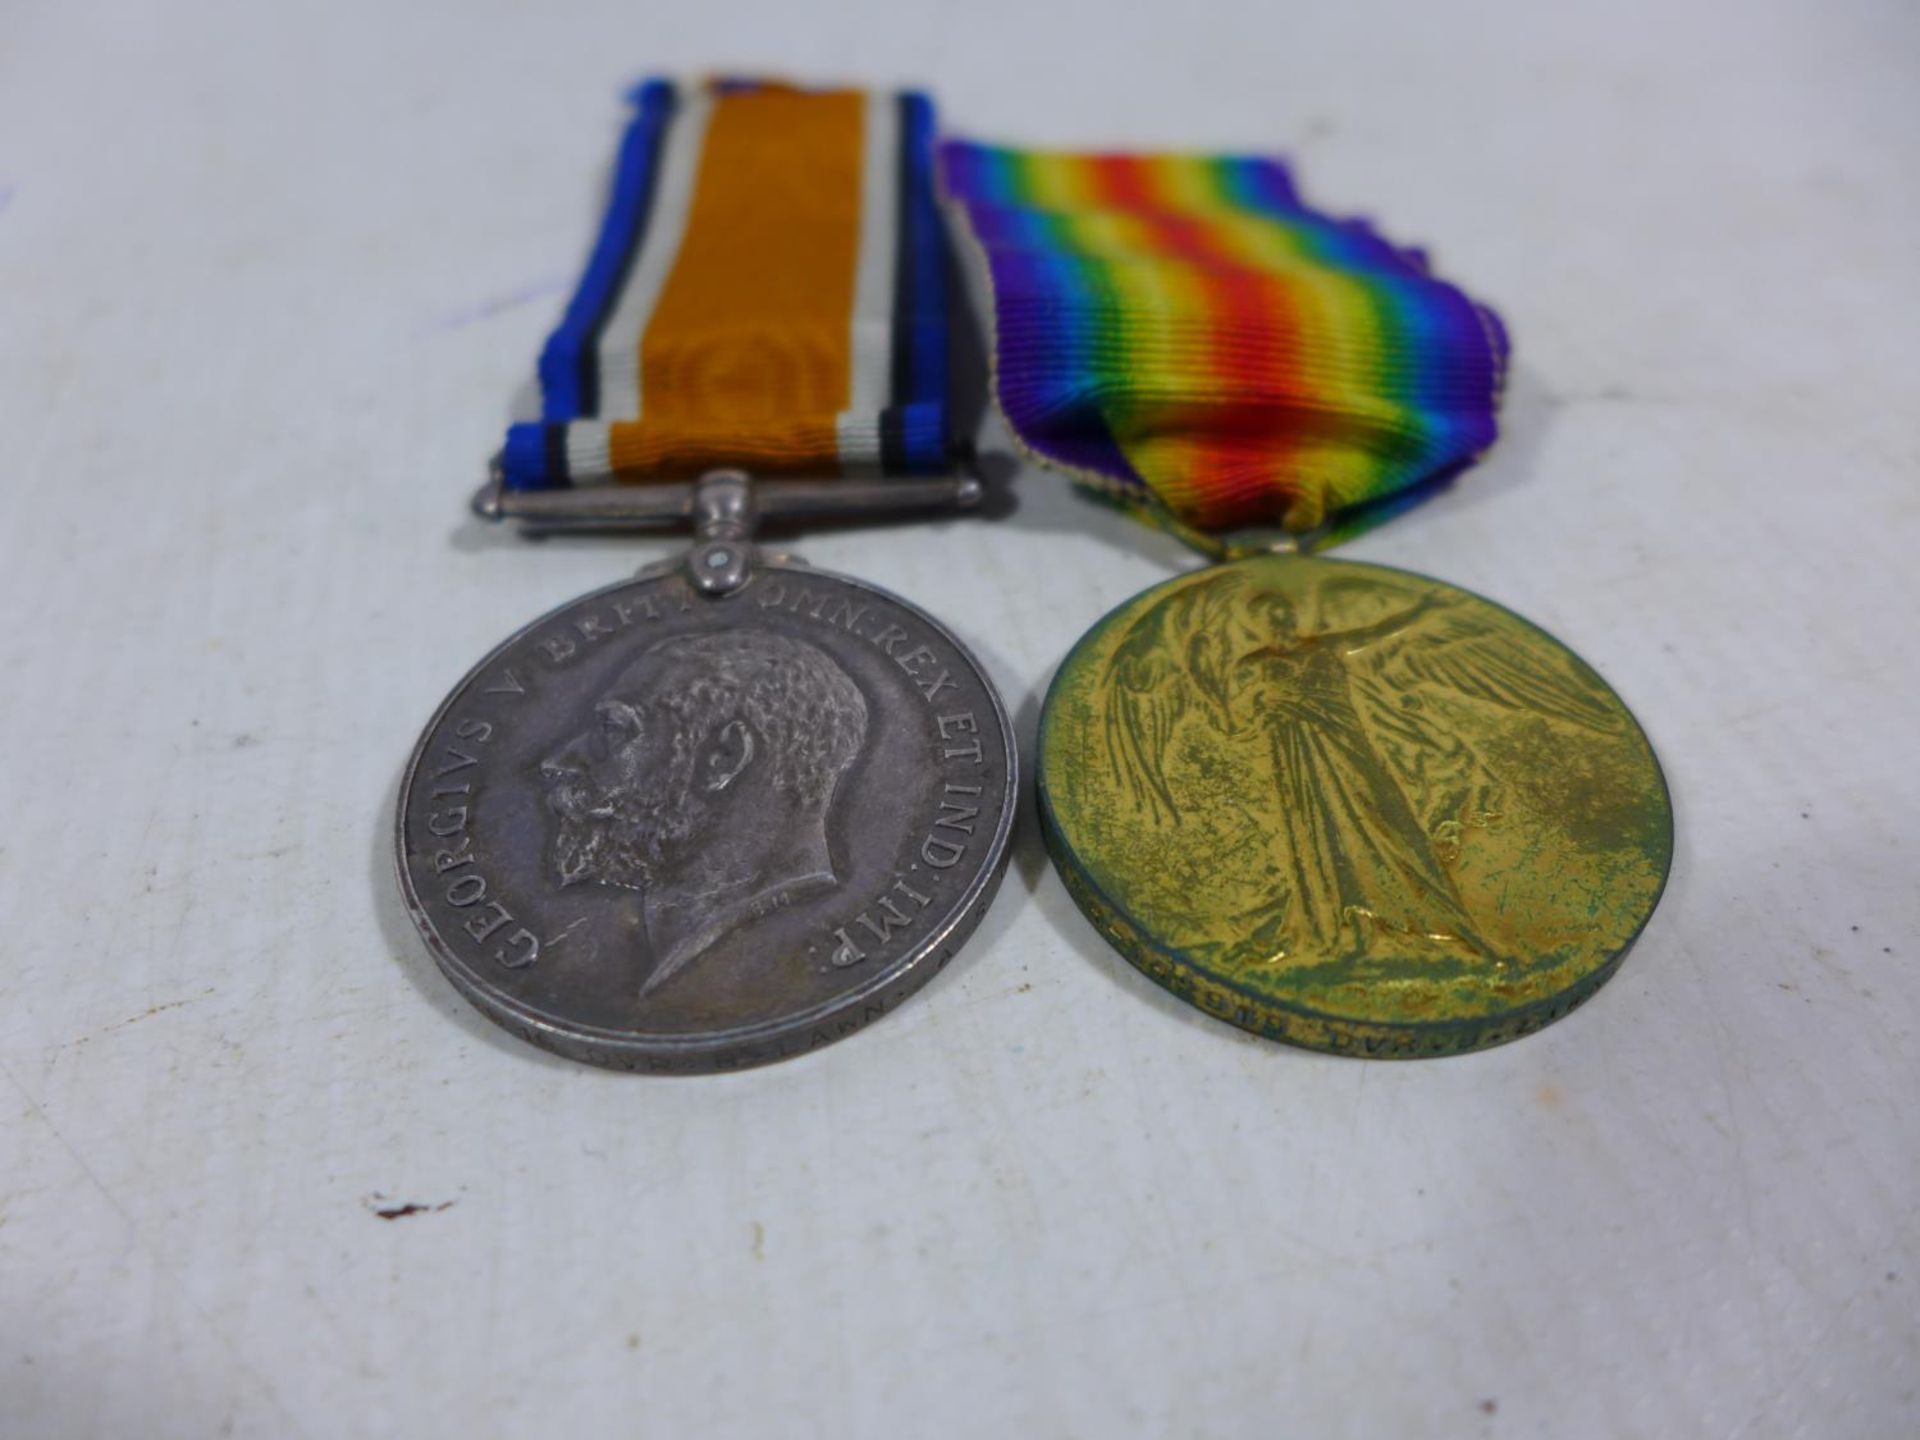 A WORLD WAR I MEDAL PAIR AWARDED TO T4 142919 DRIVER B LAWN ARMY SERVICES CORPS